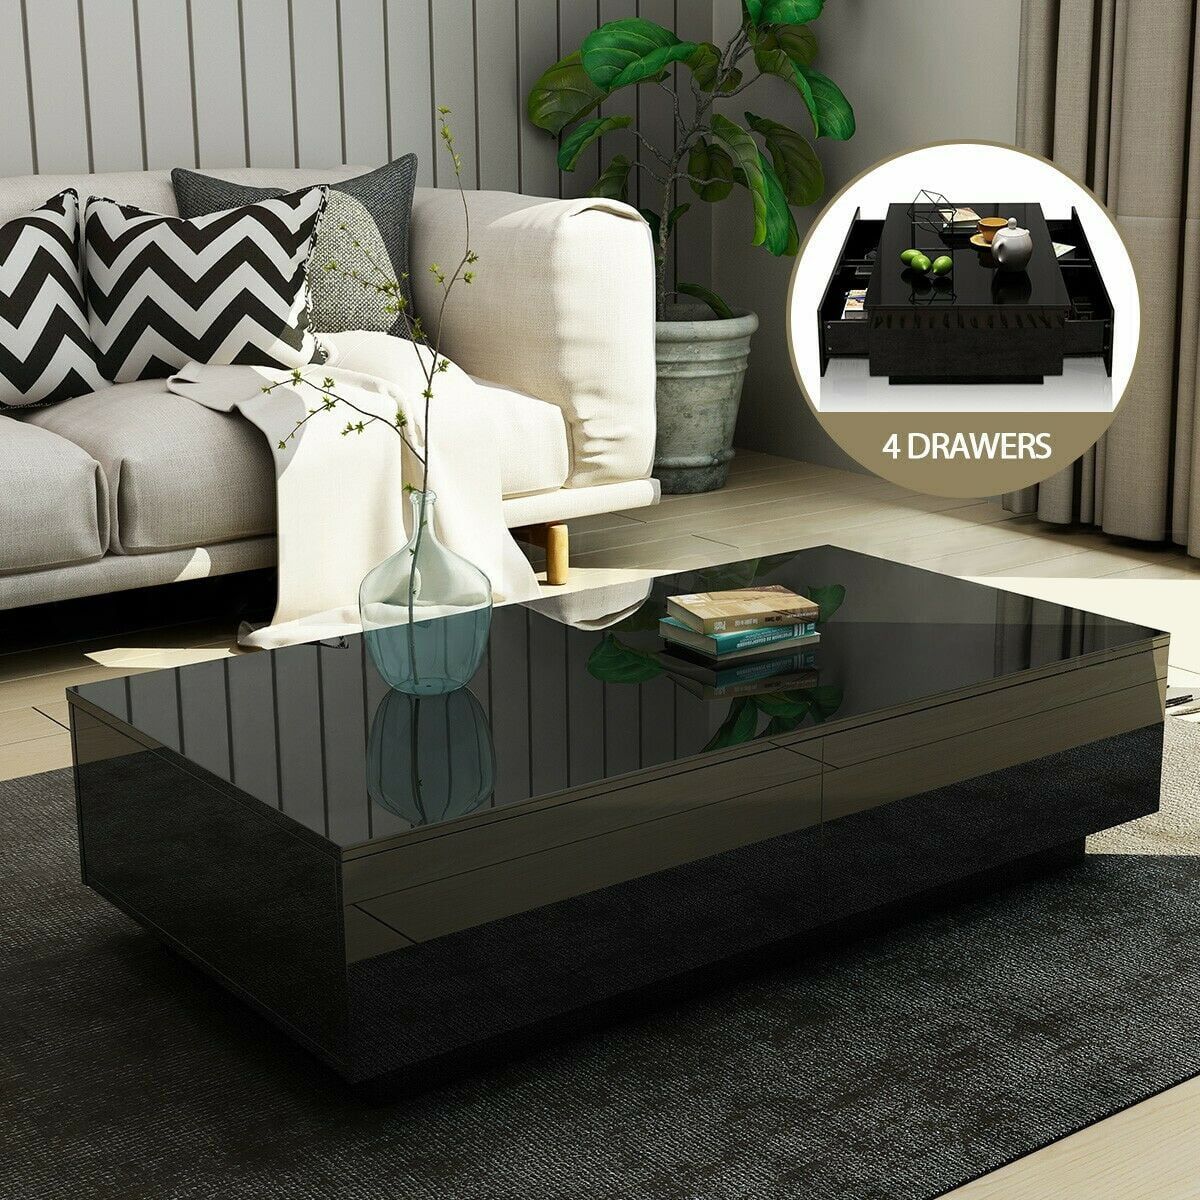 Hommpa High Gloss Black Coffee Table With 4 Drawers And Open Shelf Led Sofa  Side End Tea Table Modern Living Room Furniture With Storage Space –  Walmart In High Gloss Black Coffee Tables (View 10 of 15)